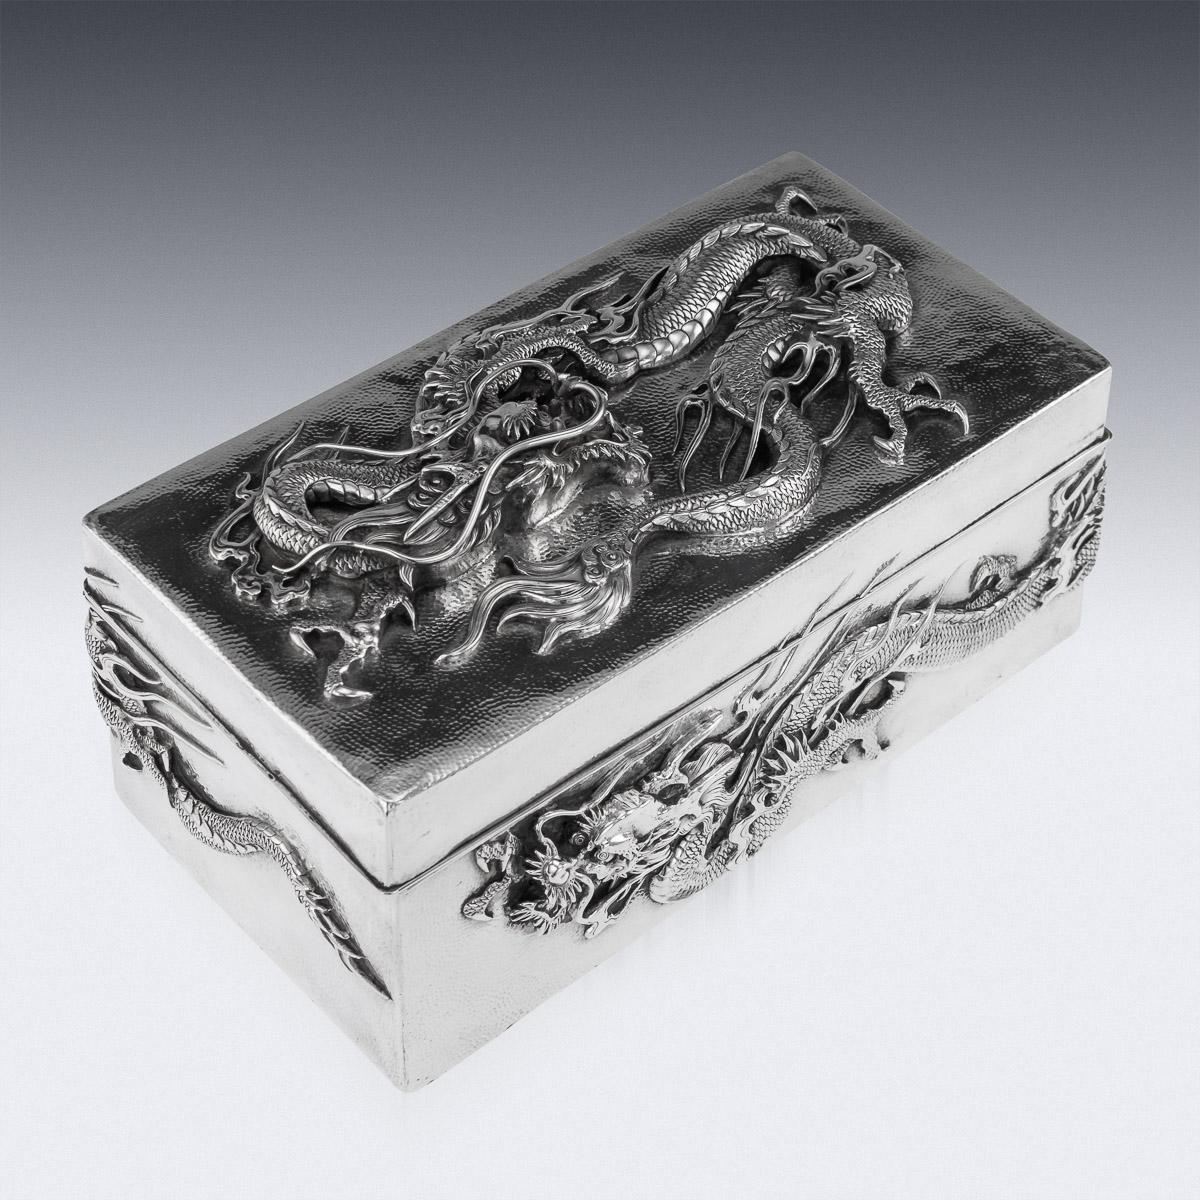 Antique early 20th century Japanese Meiji period solid silver cigar box, double skinned body, sides and lid are embossed in high-relief with water dragons and applied with flowing whiskers on hand hammered ground, dark wood lined base and interior.